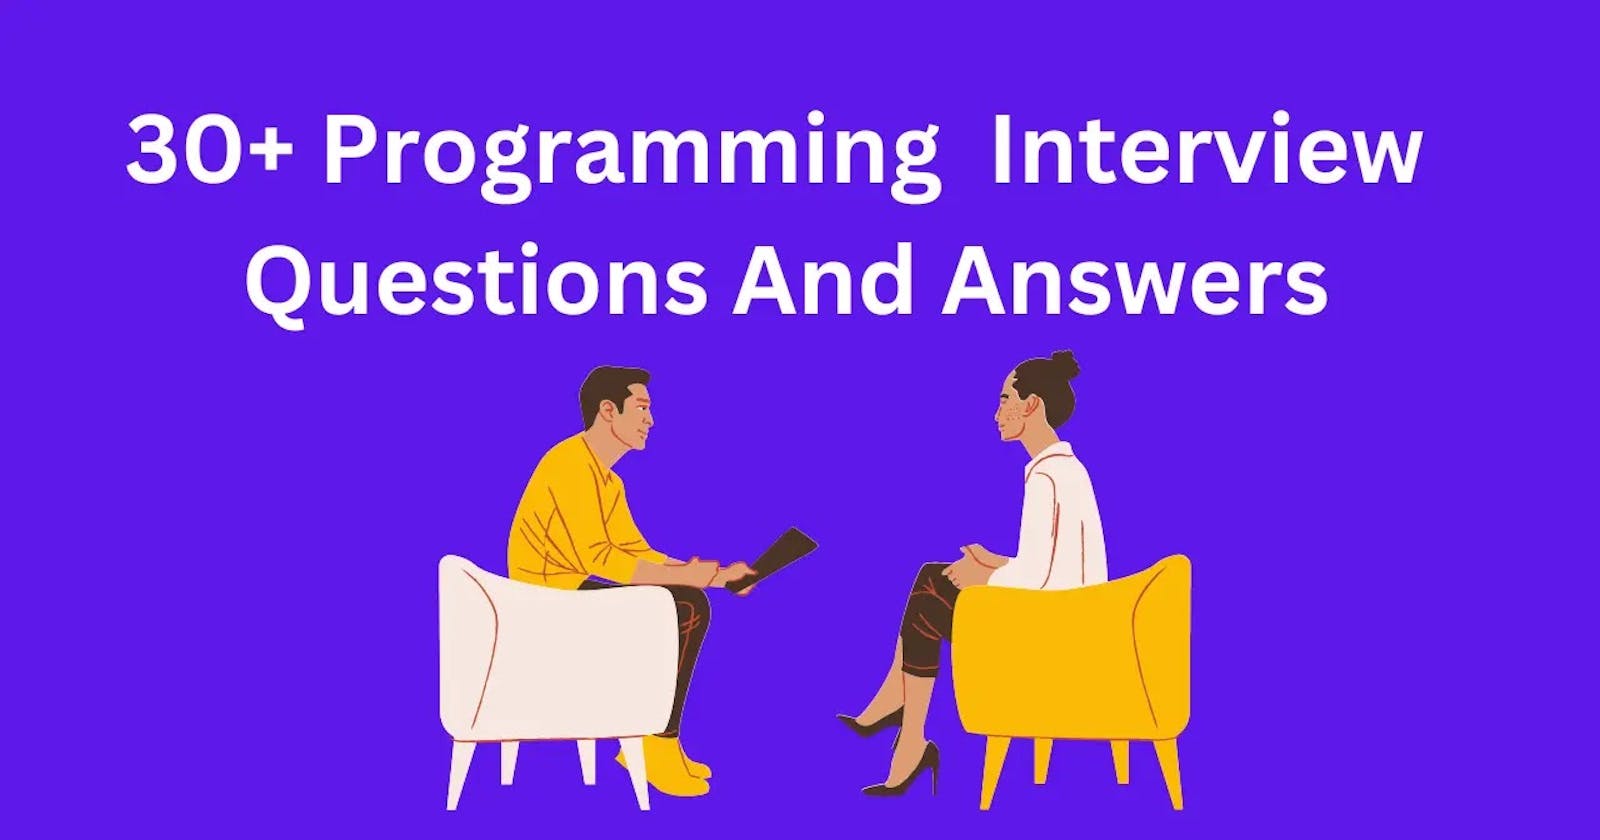 30+ Programming Interview Questions And Answers